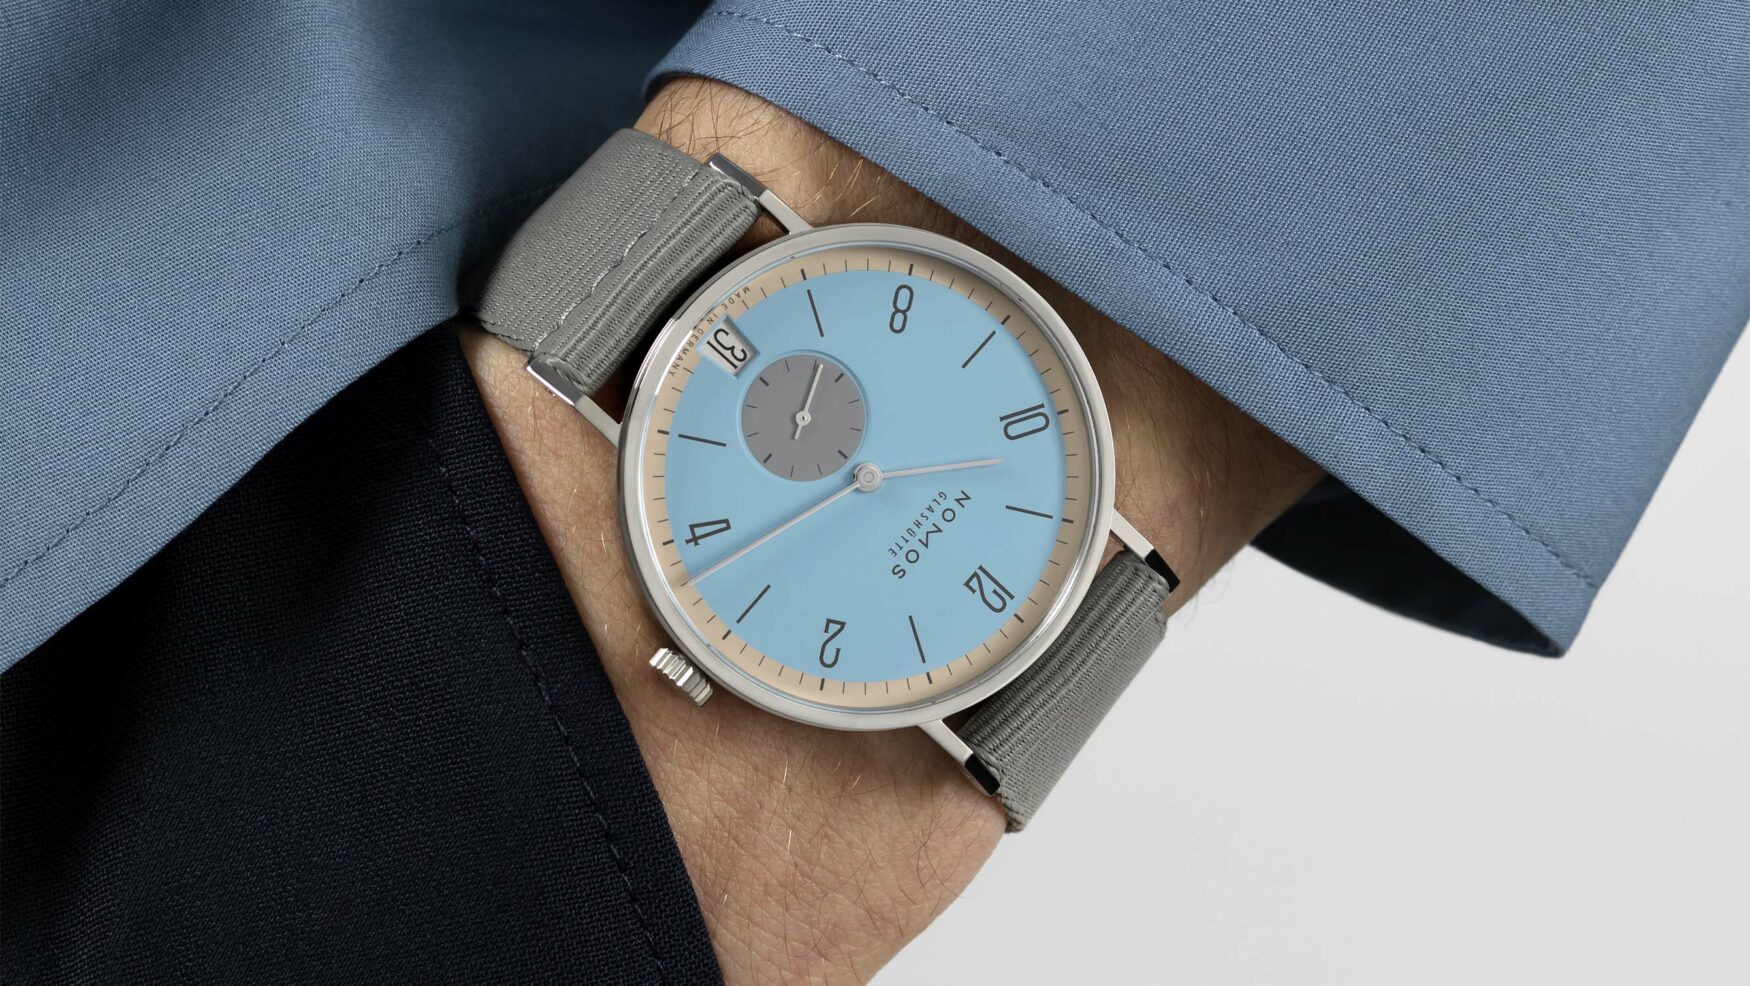 You want dial colours? Nomos has the answer!